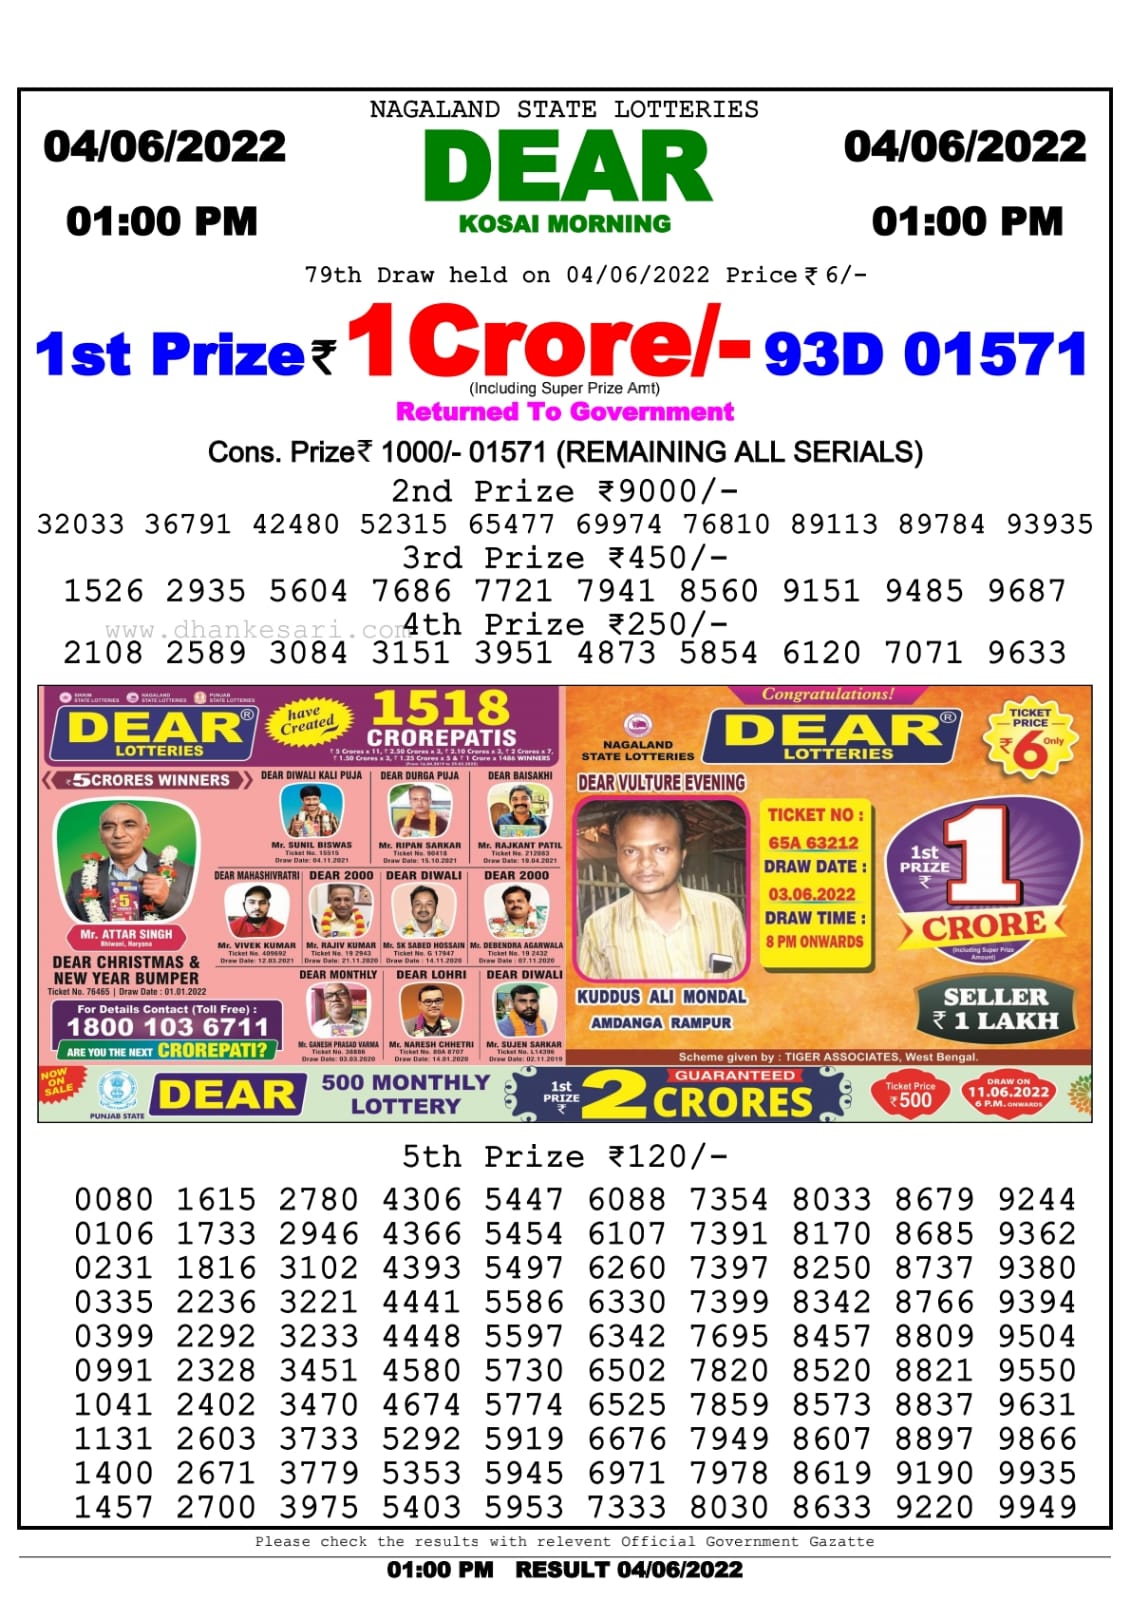 Dear Lottery Nagaland state Lottery Results 01.00 pm 04.06.2022